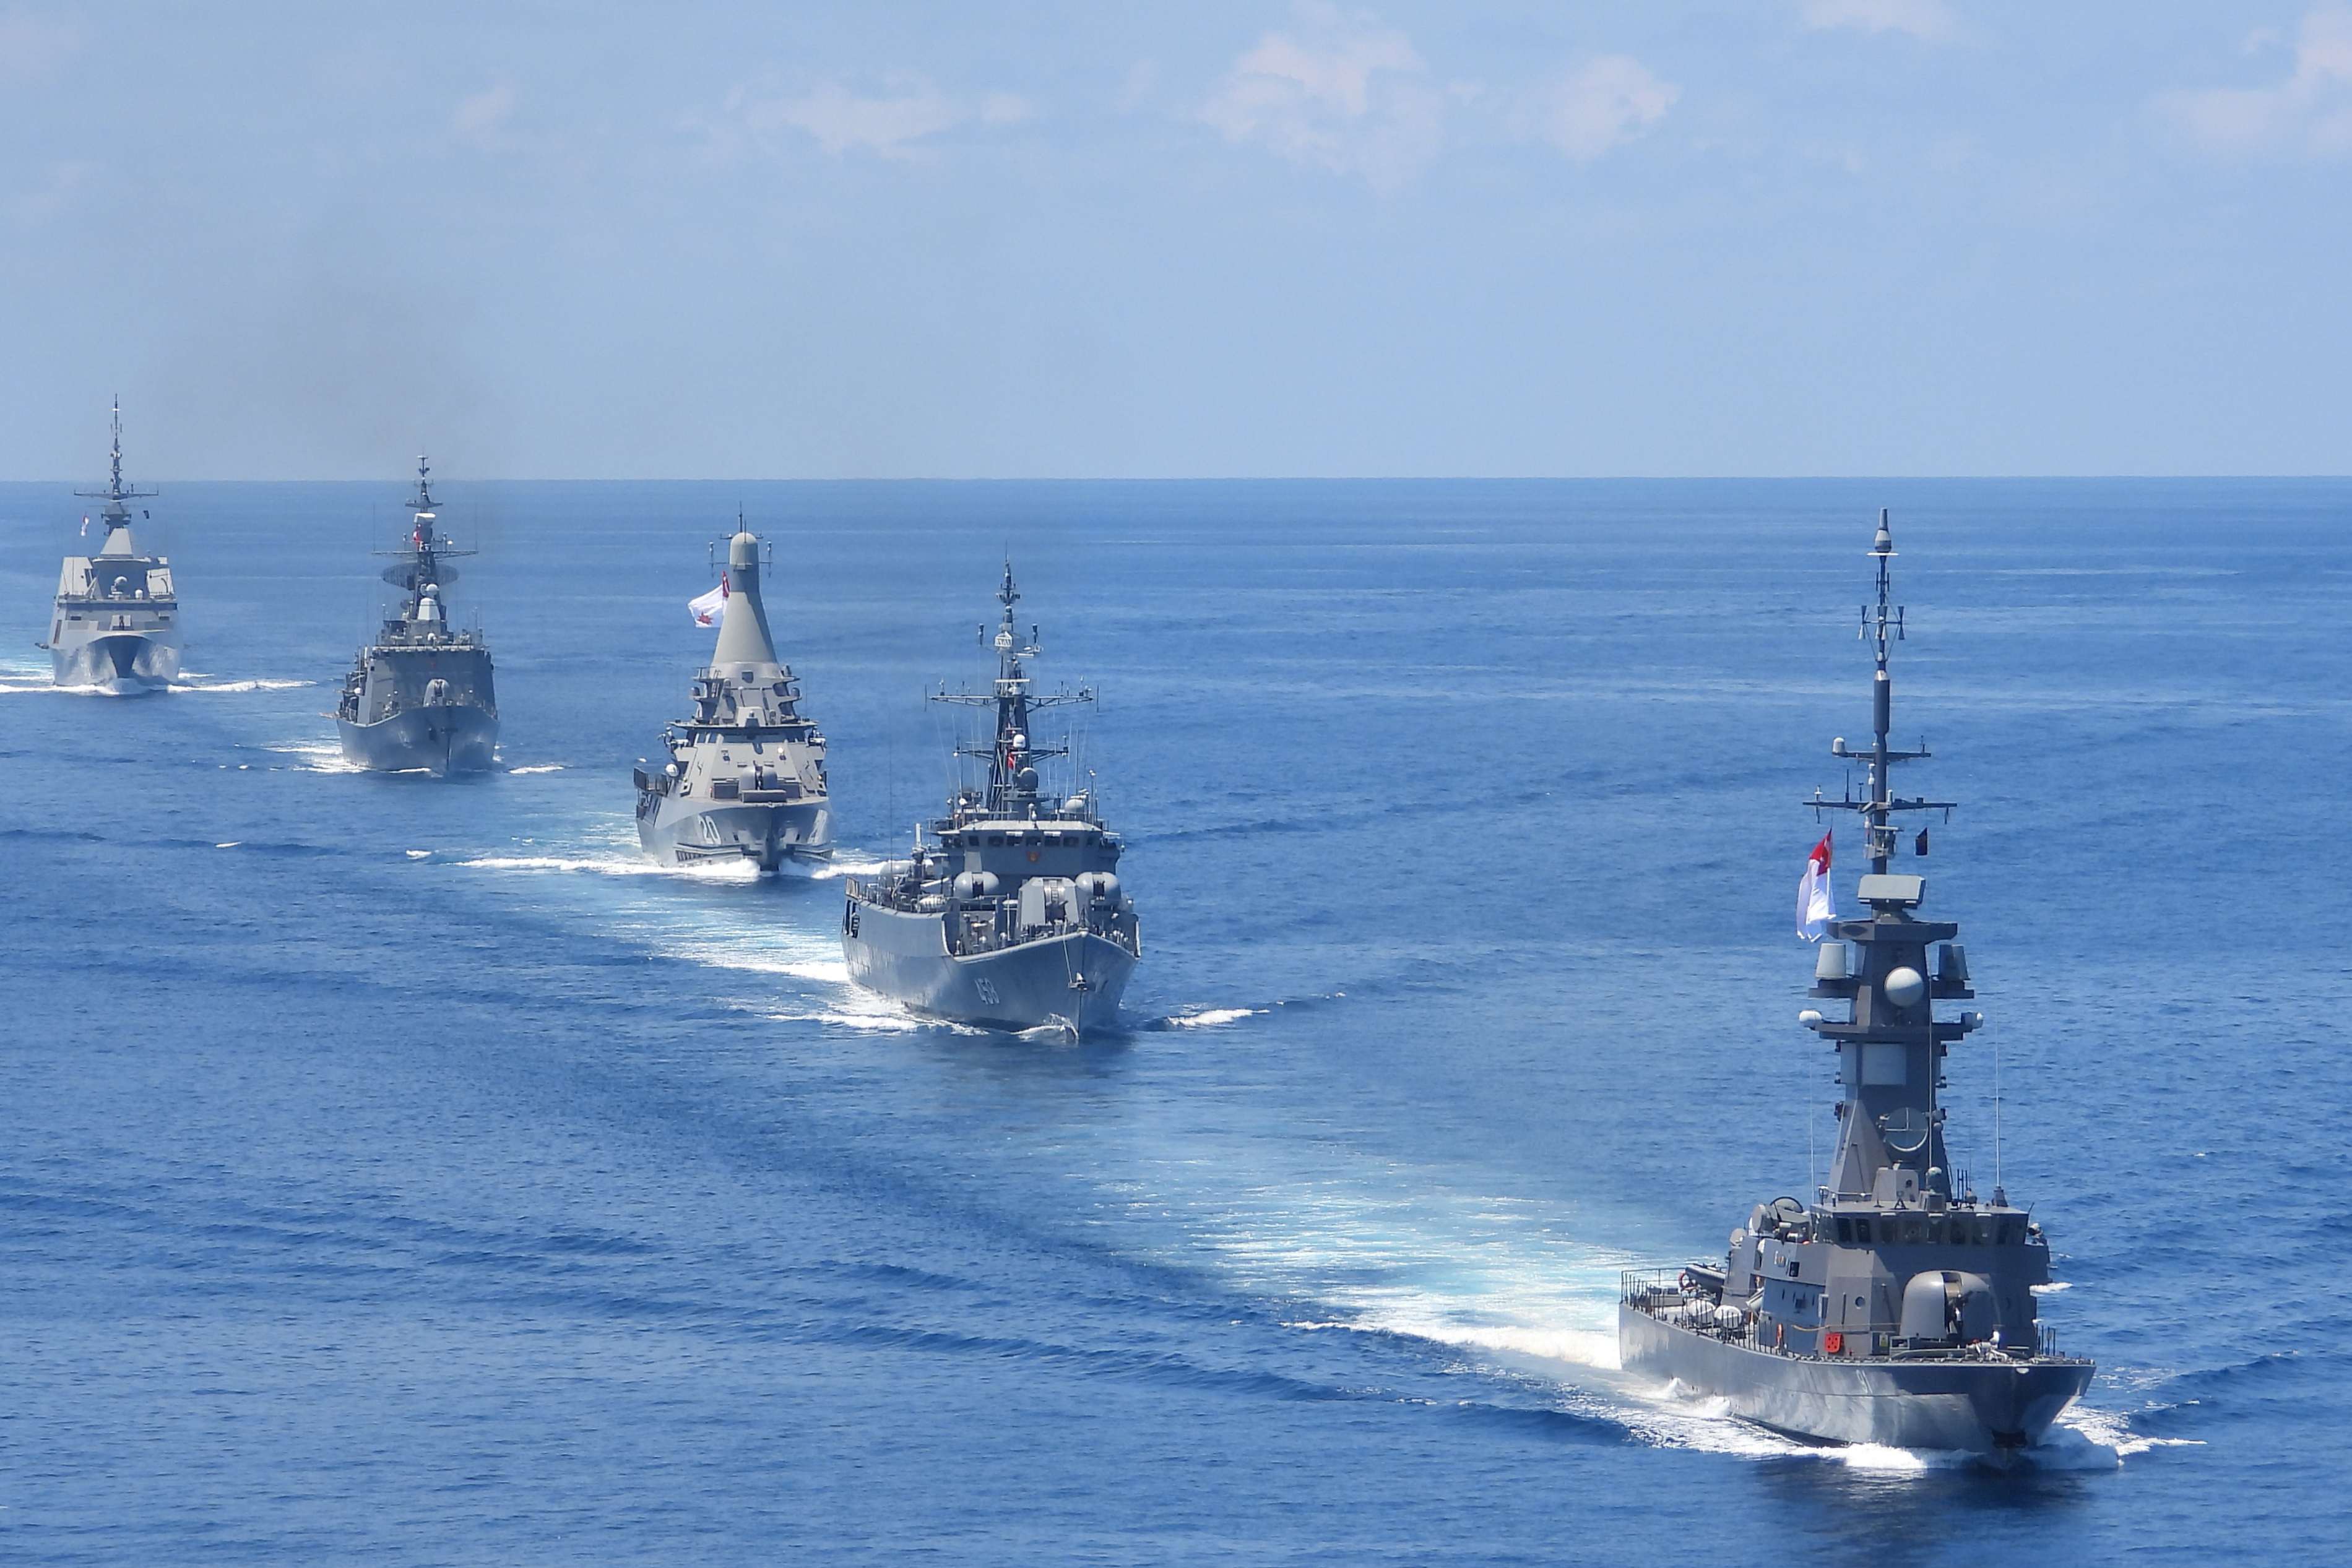 The Republic of Singapore Navy (RSN) and Royal Thai Navy (RTN) ships sailing in formation as part of Exercise Singsiam 2022.